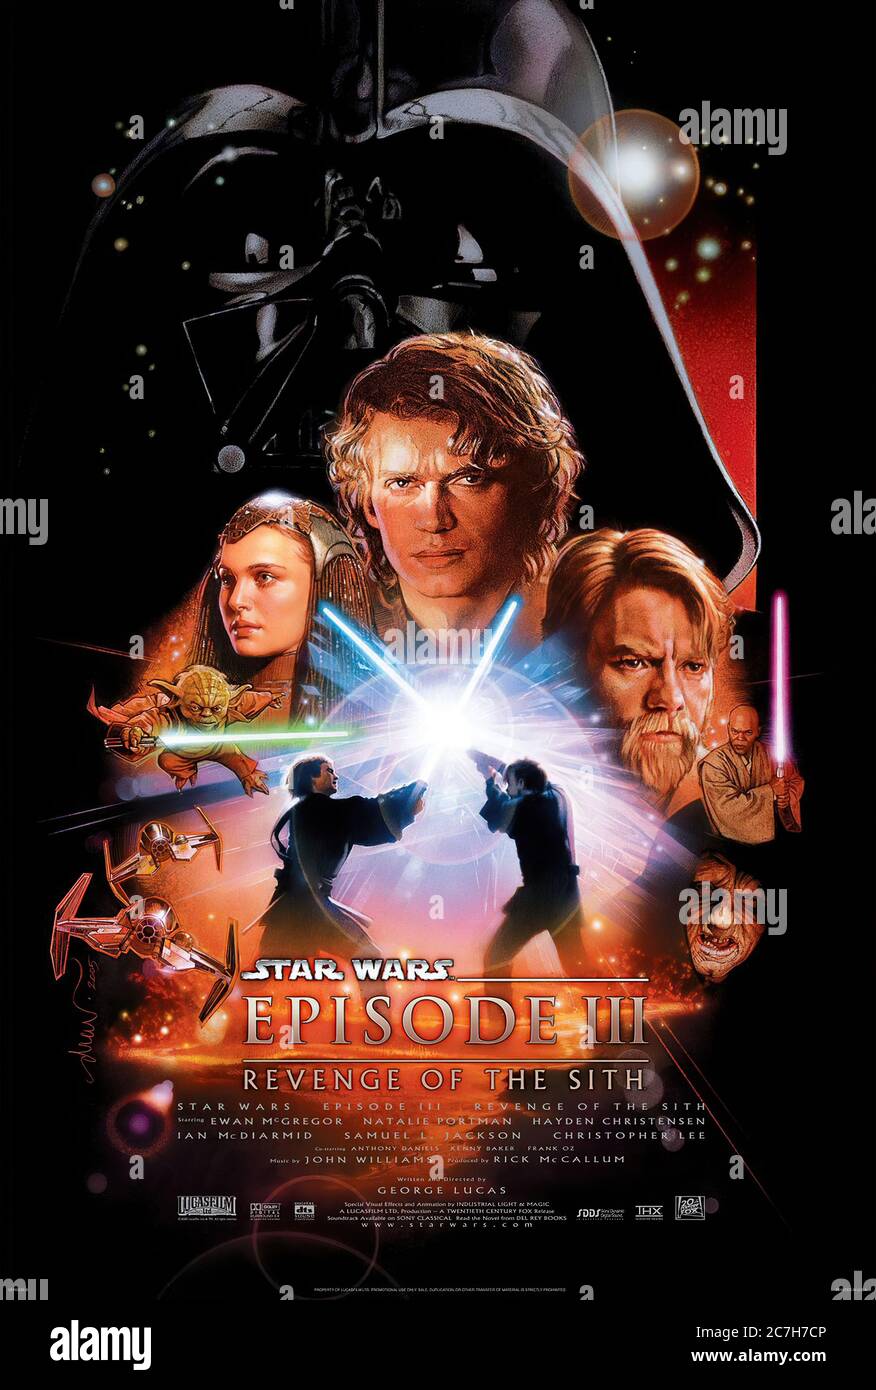 Star Wars Episode Iii Revenge of the Sith - Movie Poster Stock Photo